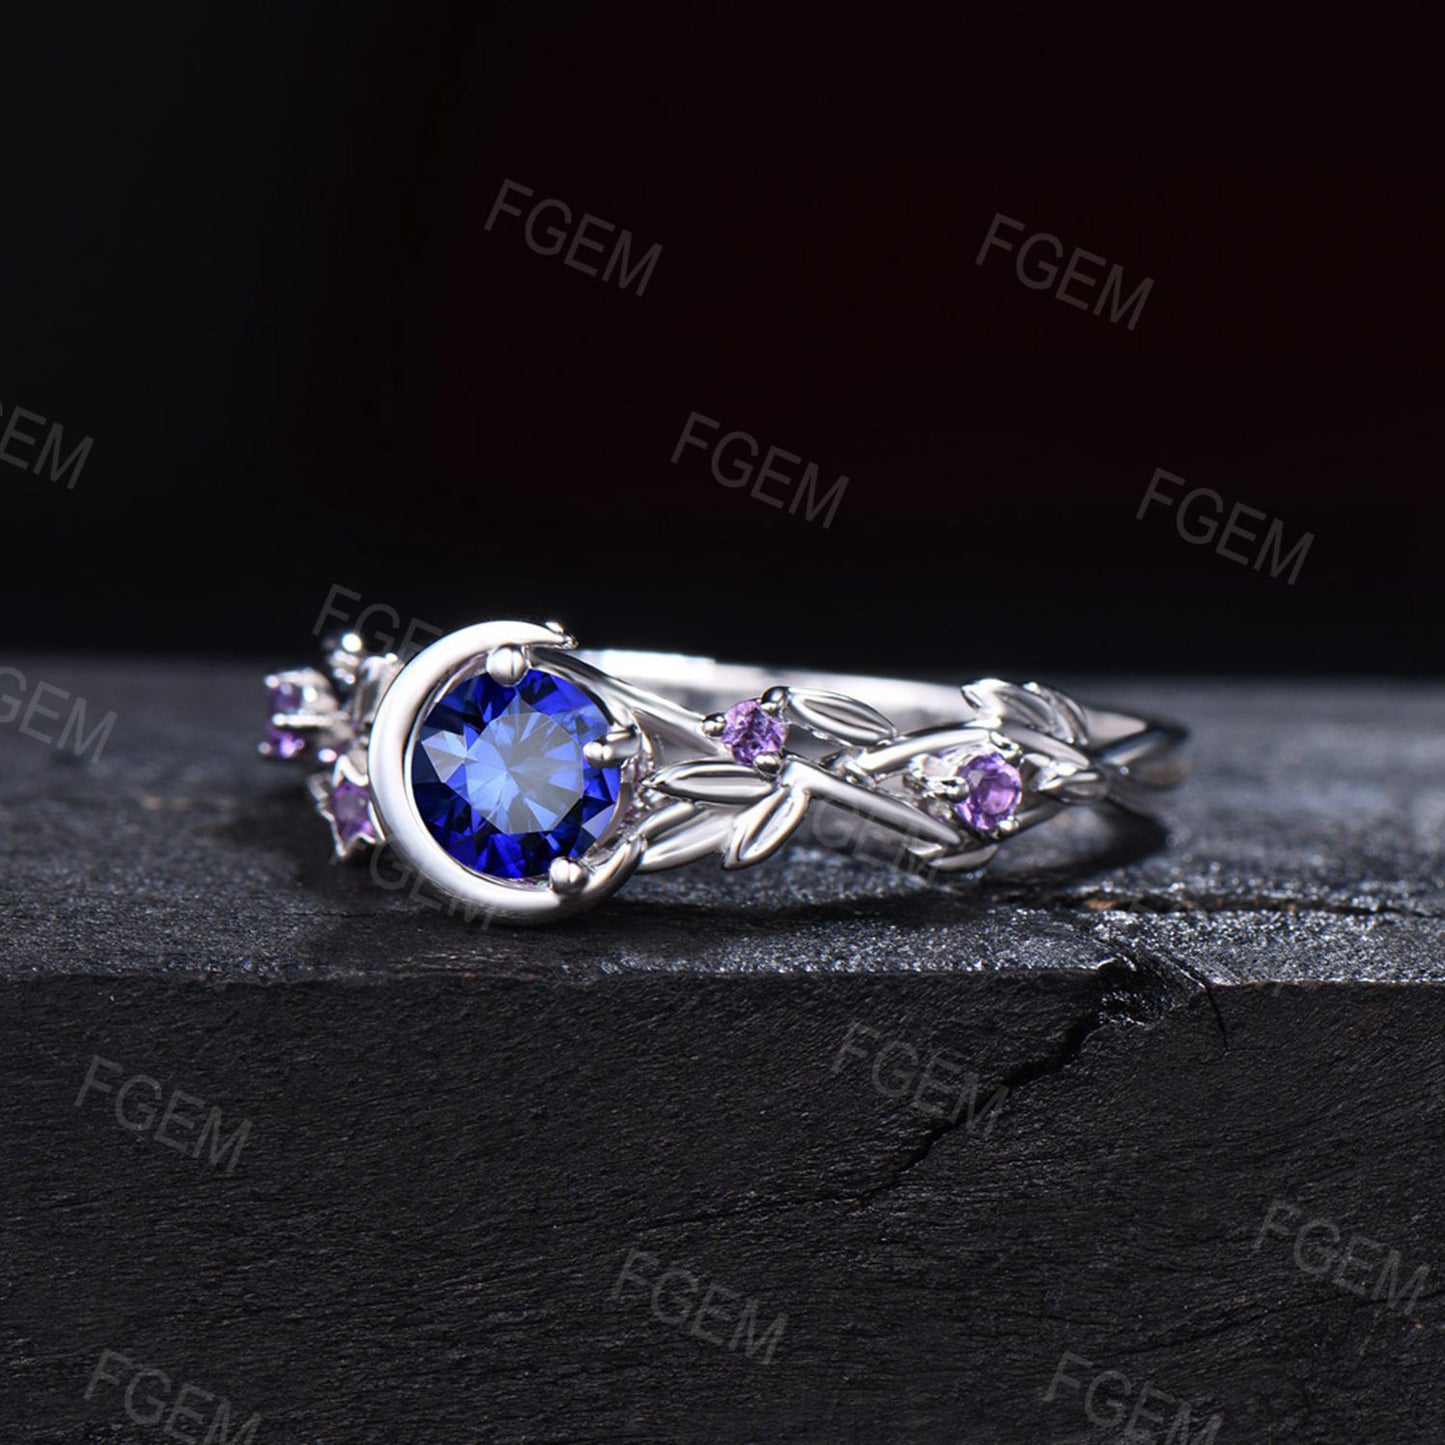 Nature Inspired Round Blue Sapphire Engagement Ring Entangled Vines Amethyst Ring Silver Moon Star Design Sapphire Wedding Ring Women Gifts